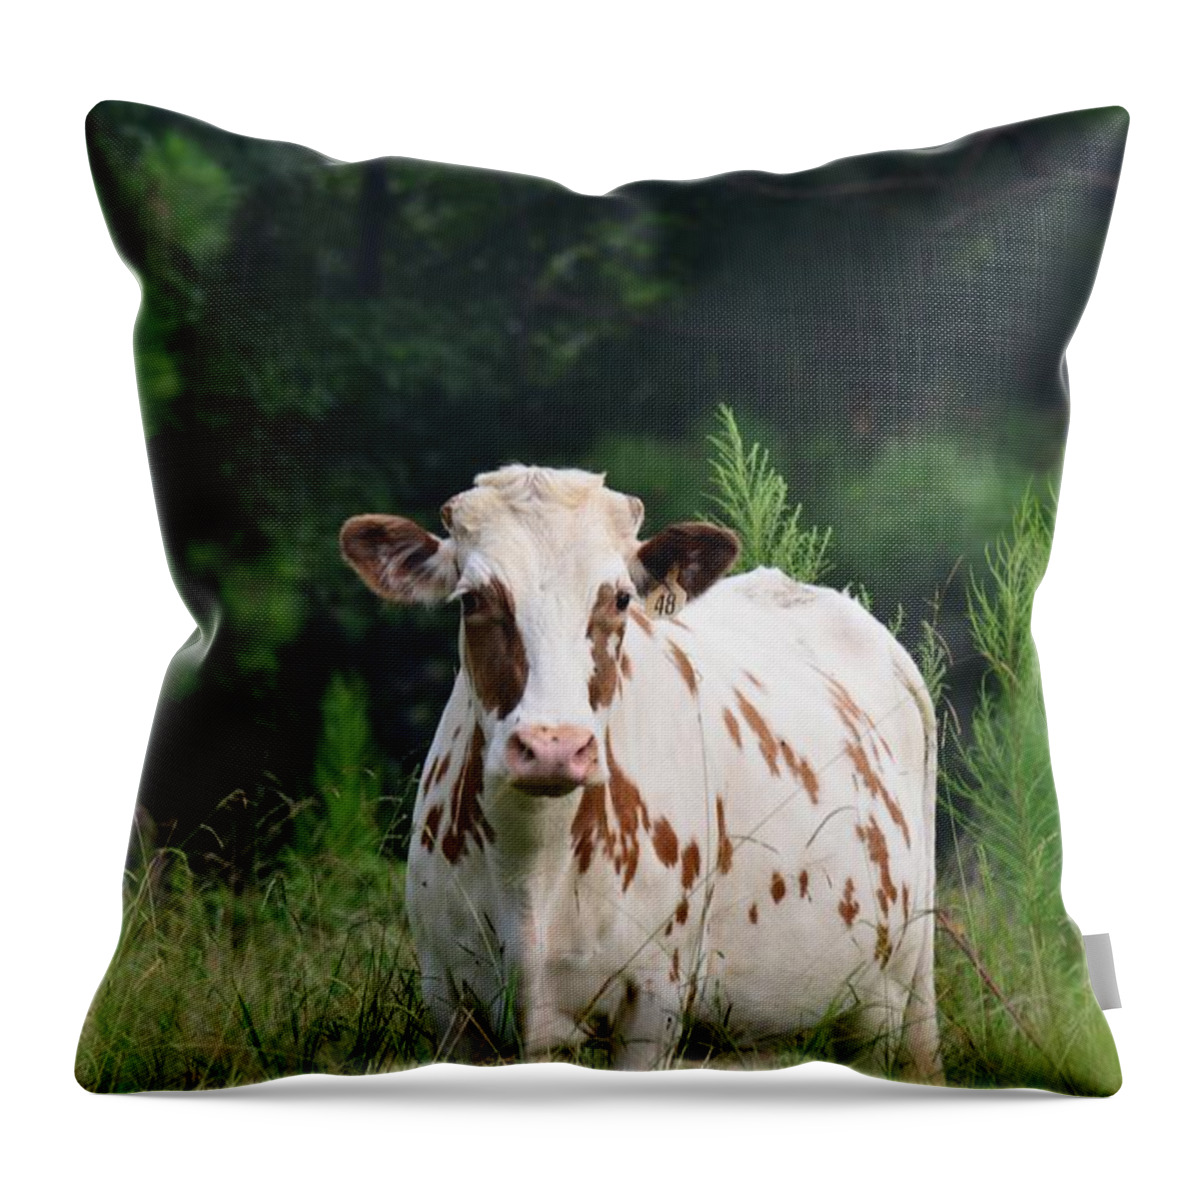 The Spotted Cow Throw Pillow featuring the photograph The Spotted Cow by Maria Urso